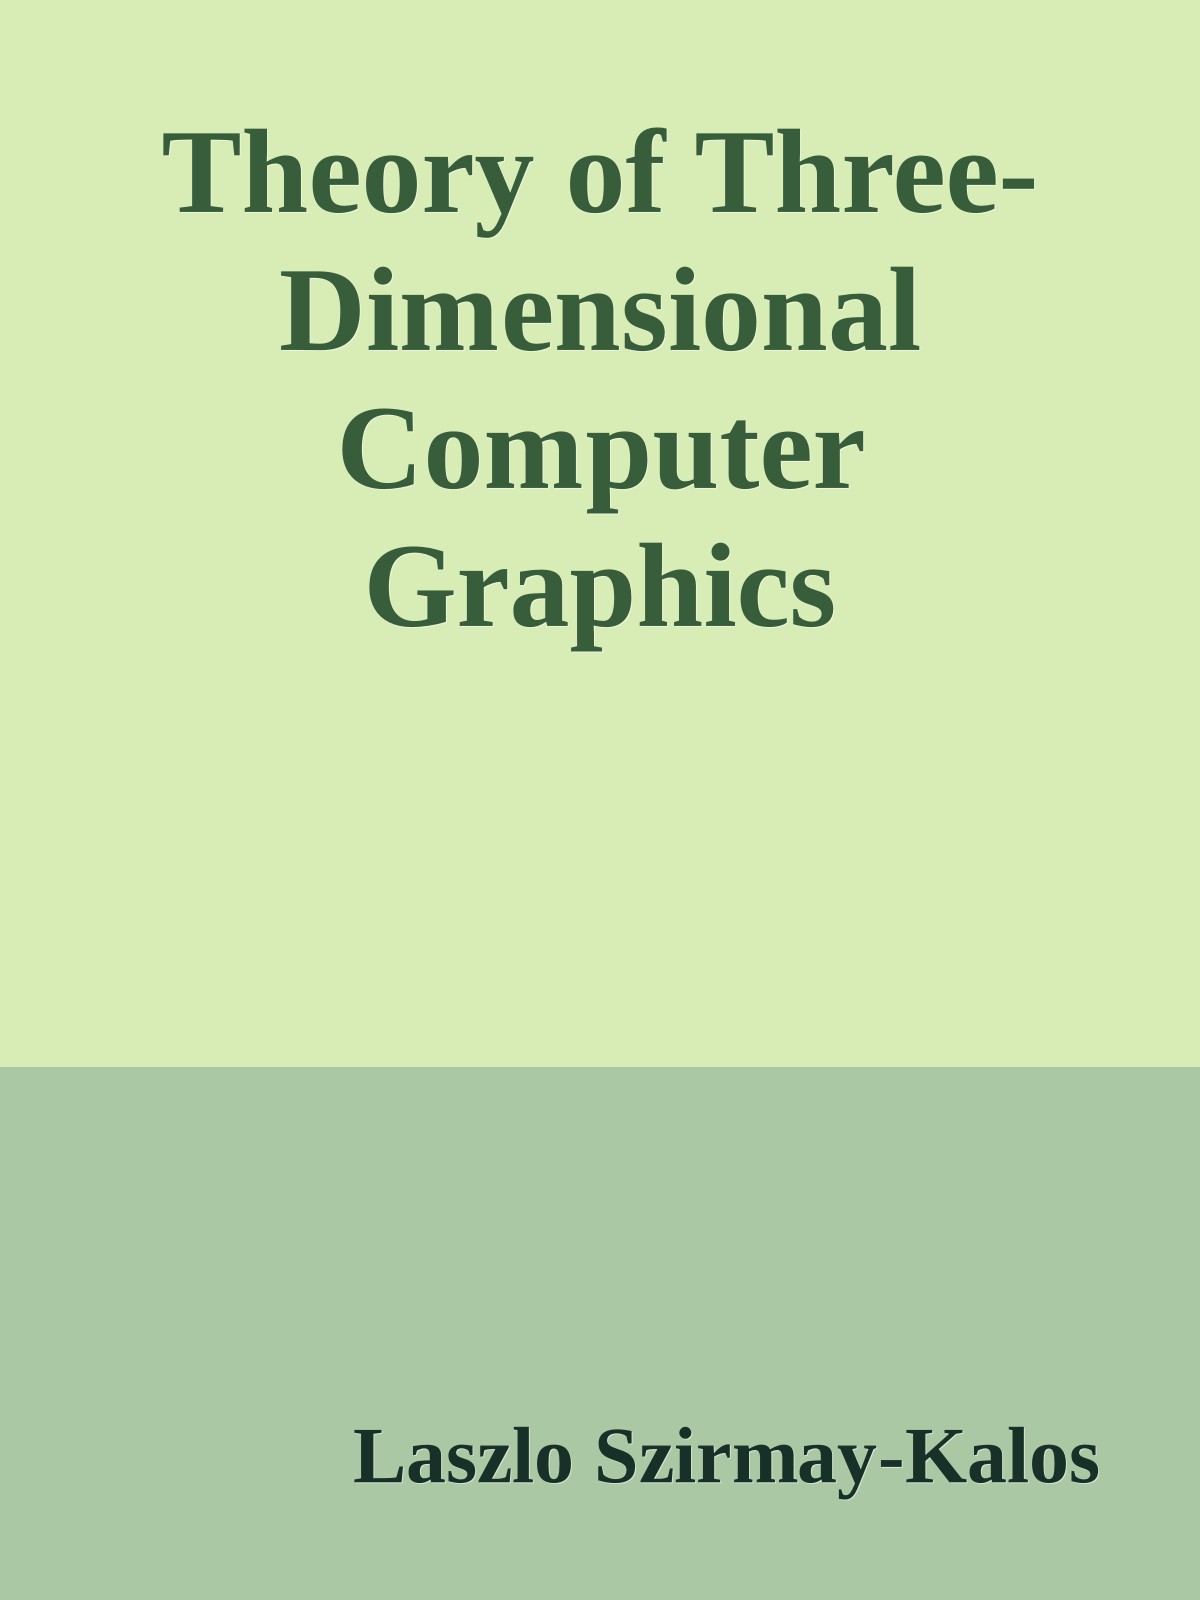 Theory of Three-Dimensional Computer Graphics